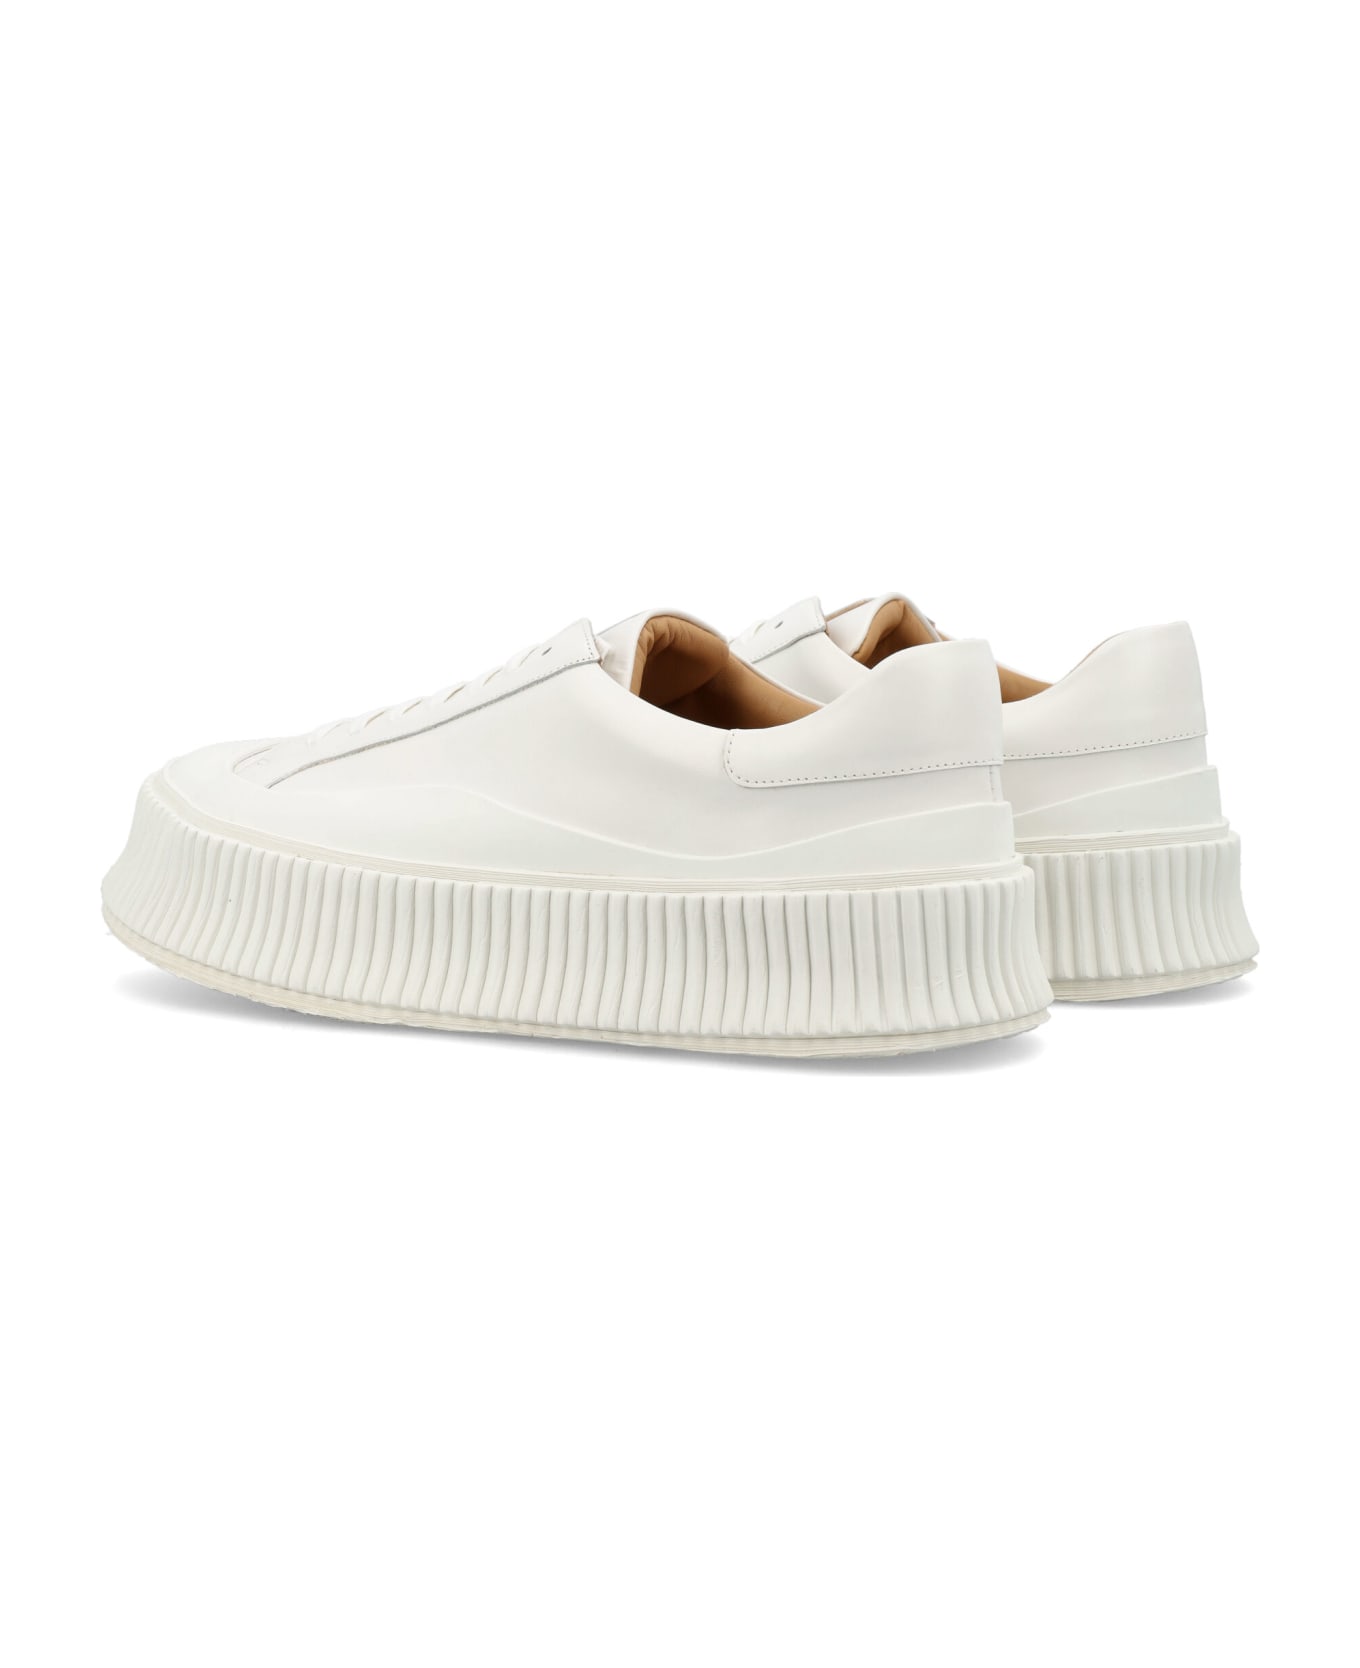 Jil Sander White Leather Sneakers - NATURAL